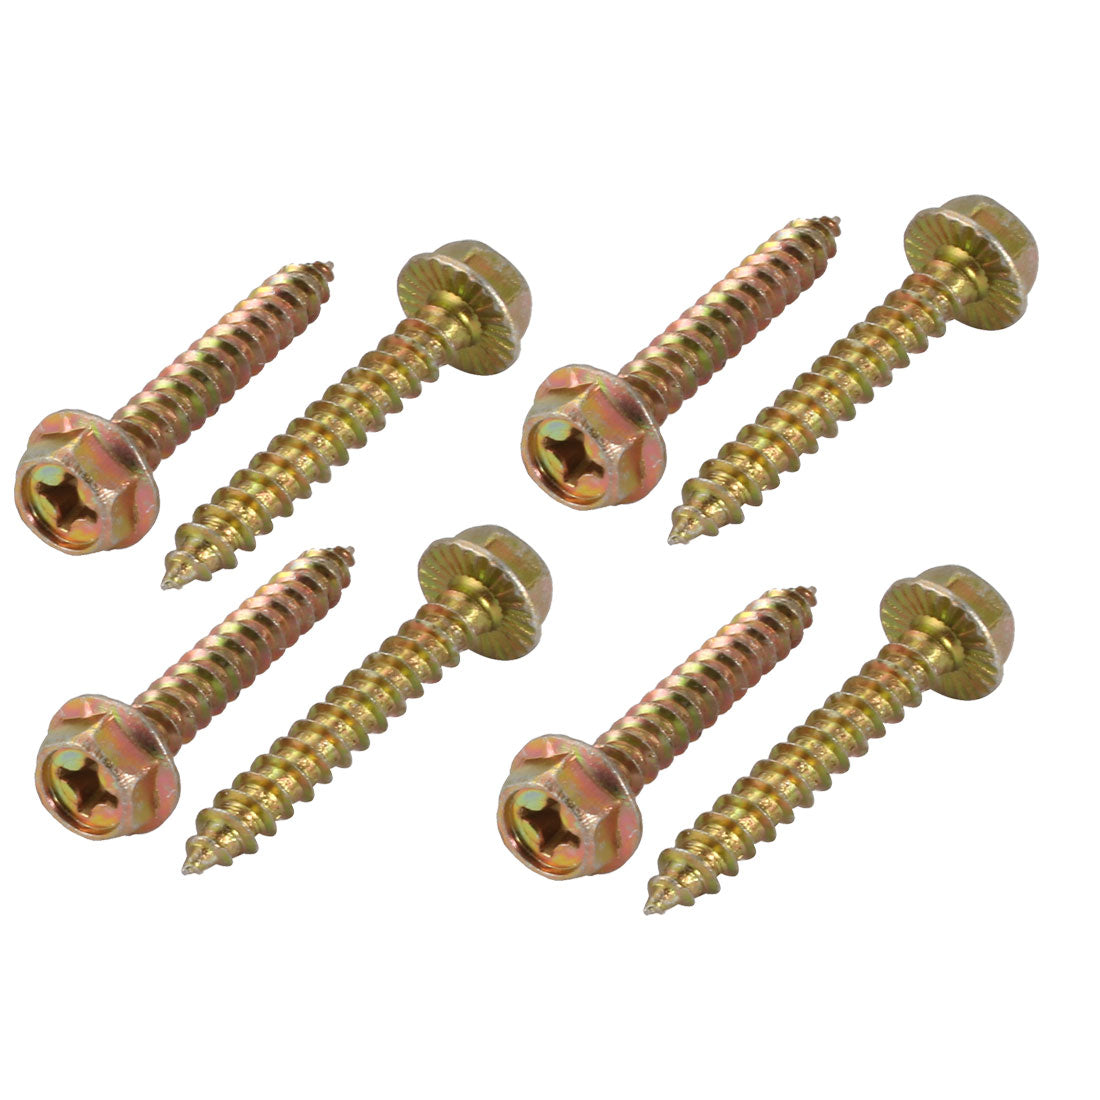 uxcell Uxcell 8Pcs M6x40mm Yellow Zinc Plated phillips Drive Serrated Flange Hex Head Self-Tapping Screws